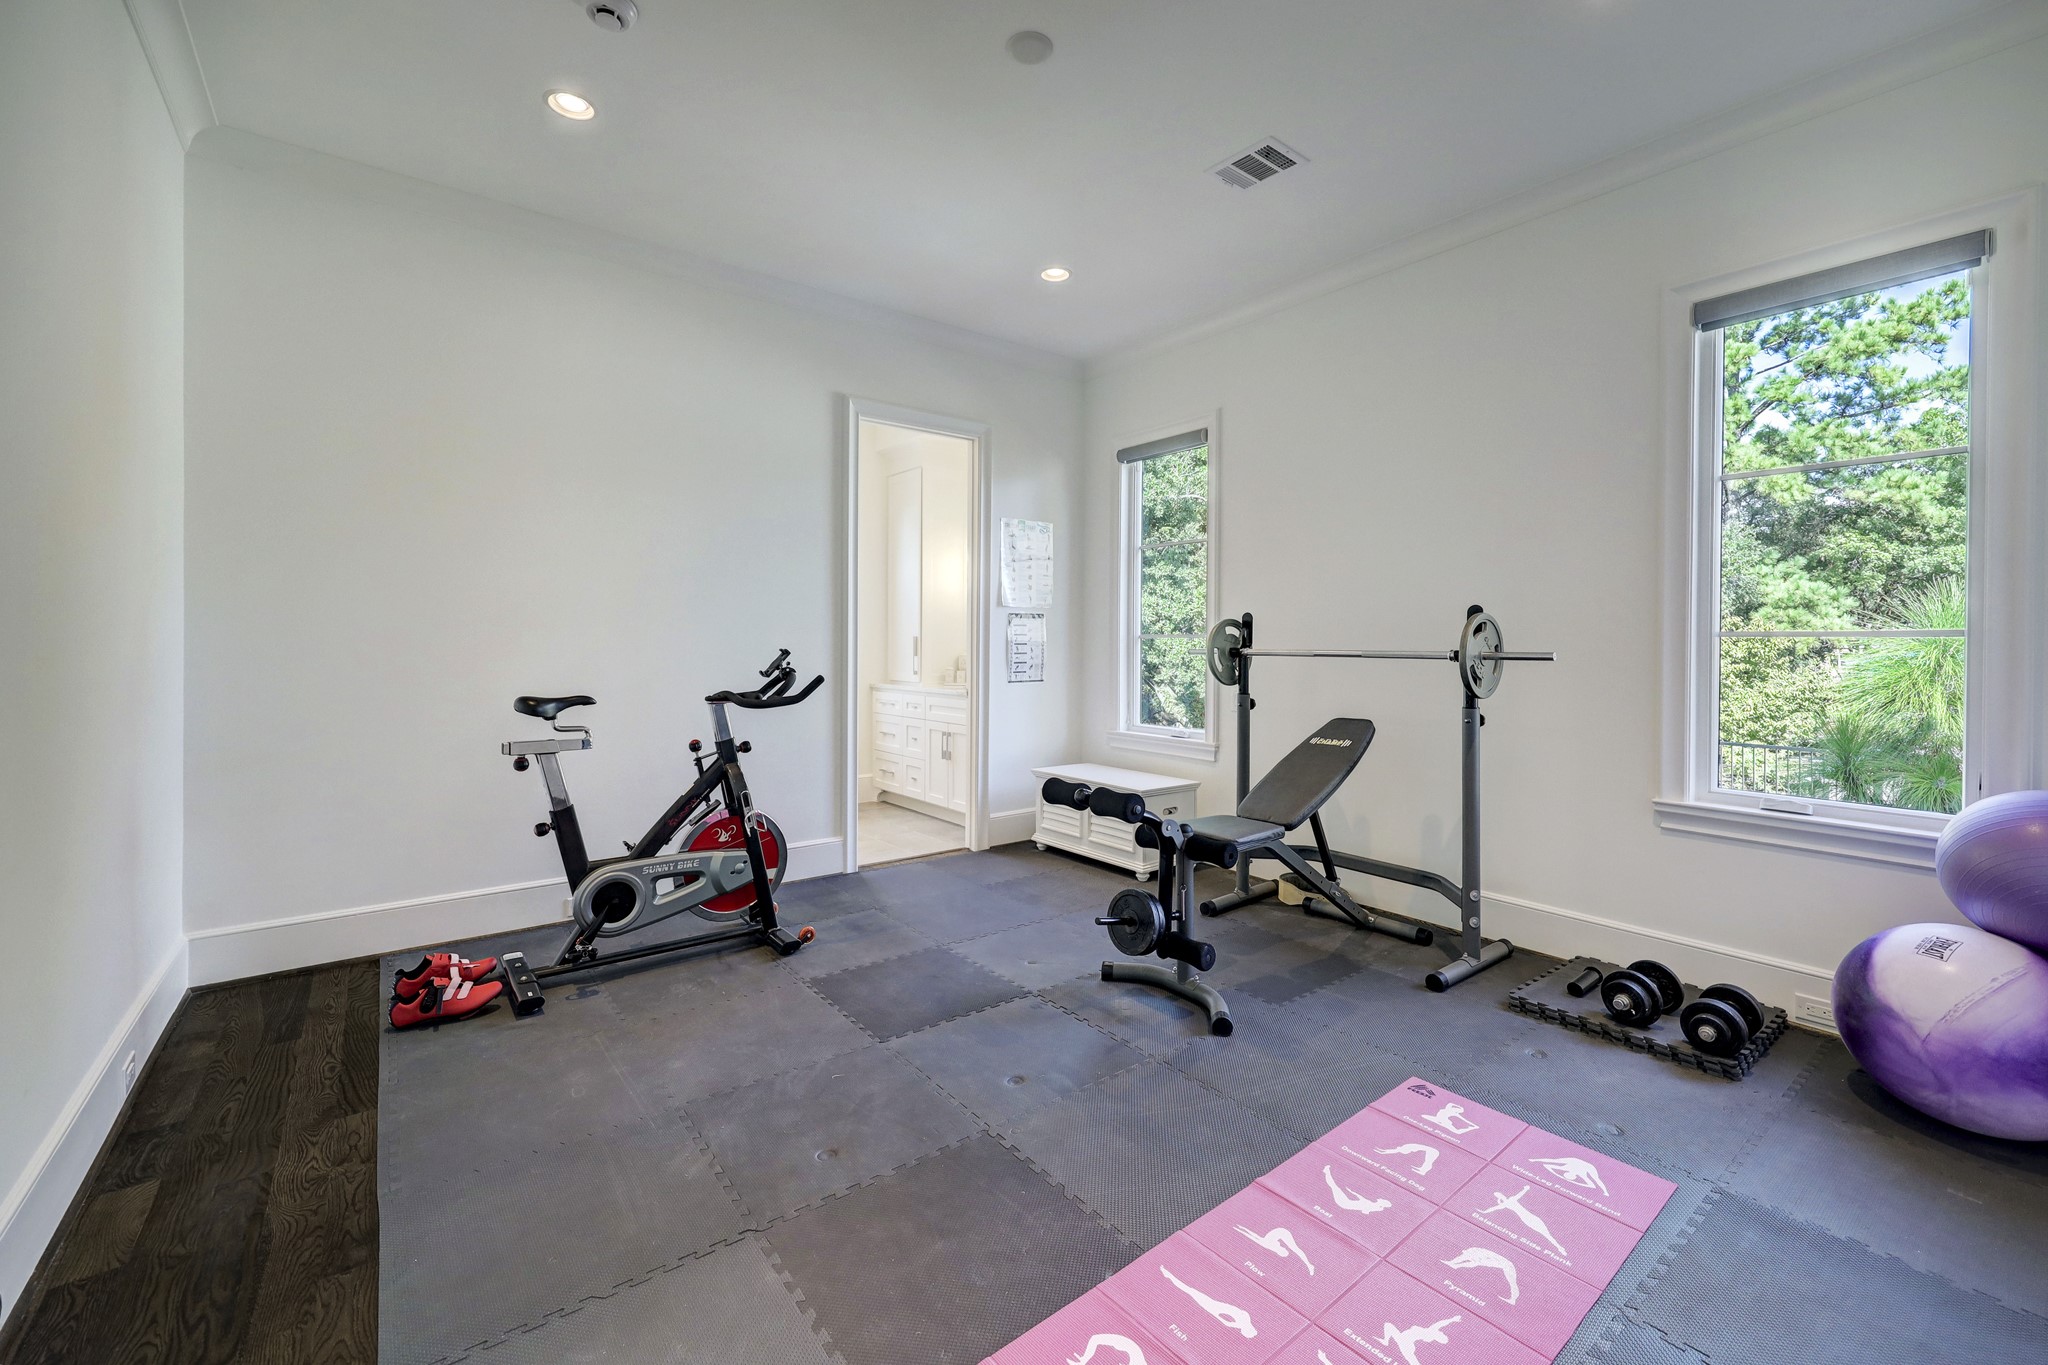 This guest bedroom is currently being used as a gym when guests are not visiting. This
room also offers privacy with its en-suite bath and generous walk-in custom-built closet.